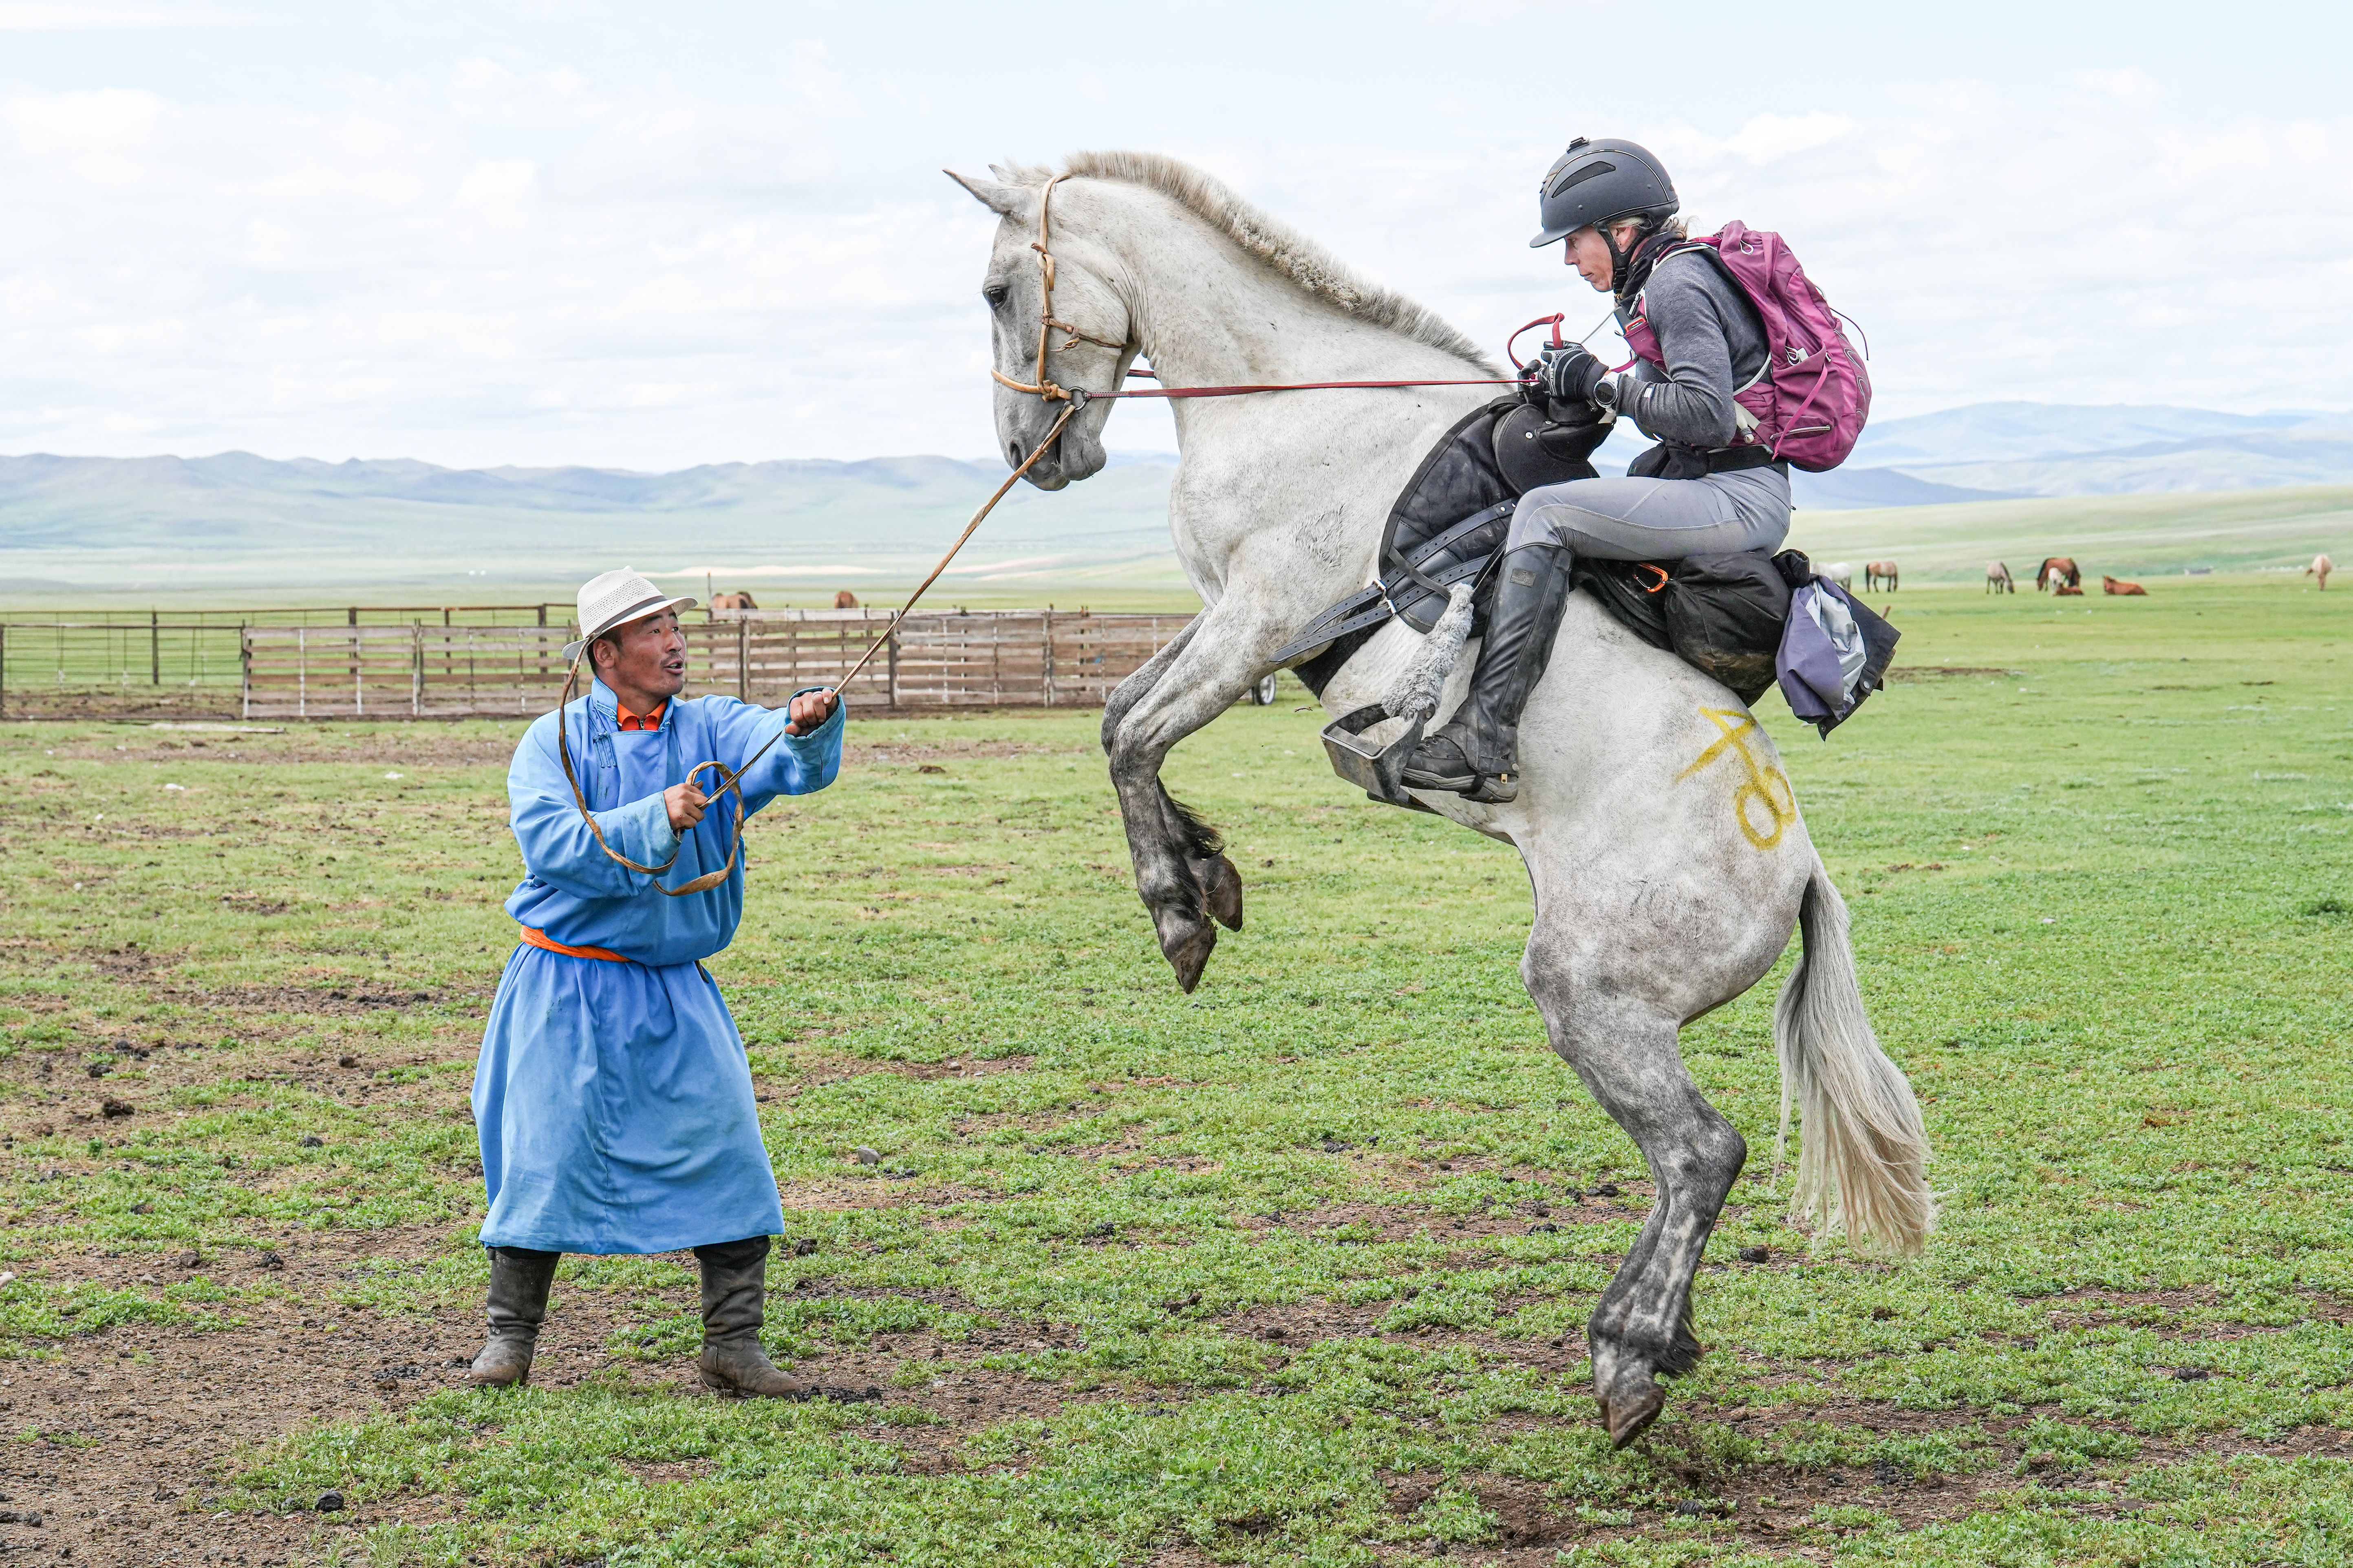 Di Pasquale said the Mongolian horses used for the race "are notorious for being semi-wild".